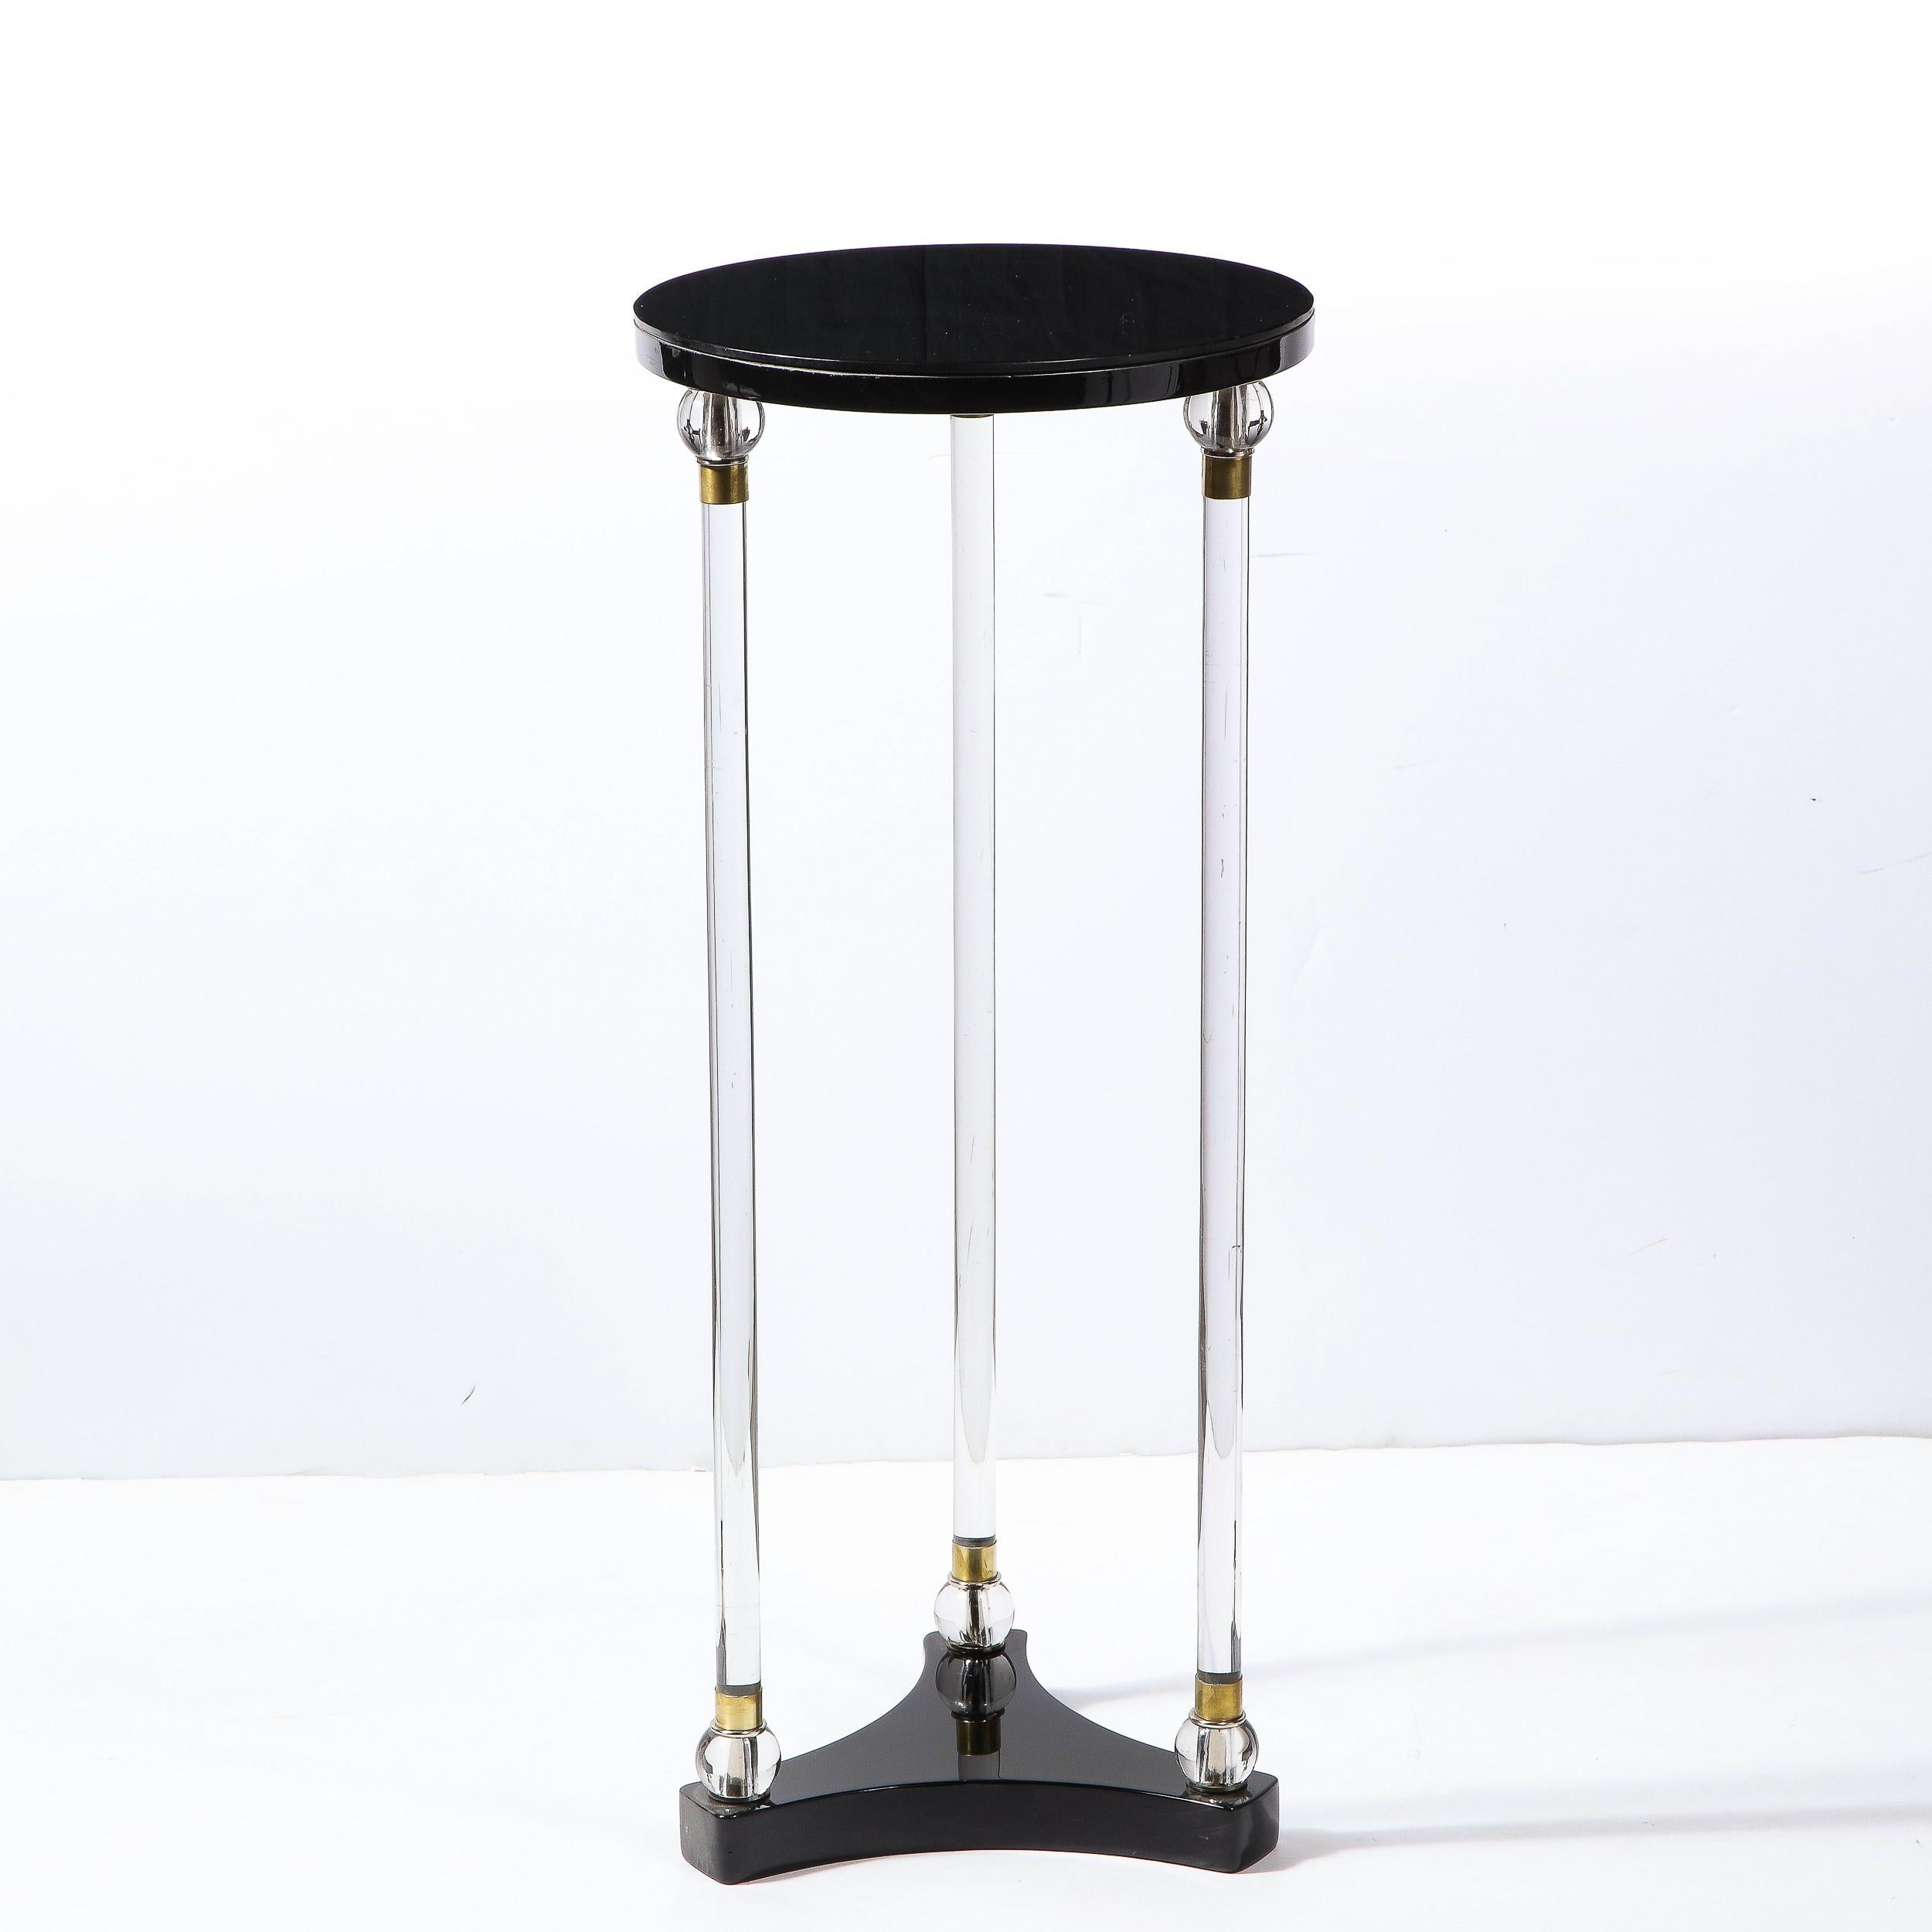 This elegant Art Deco pedestal was realized in the United States circa 1940. It features a black lacquer streamlined three point amorphic base from which three translucent cylindrical glass supports rise, capped on each with spherical embellishments